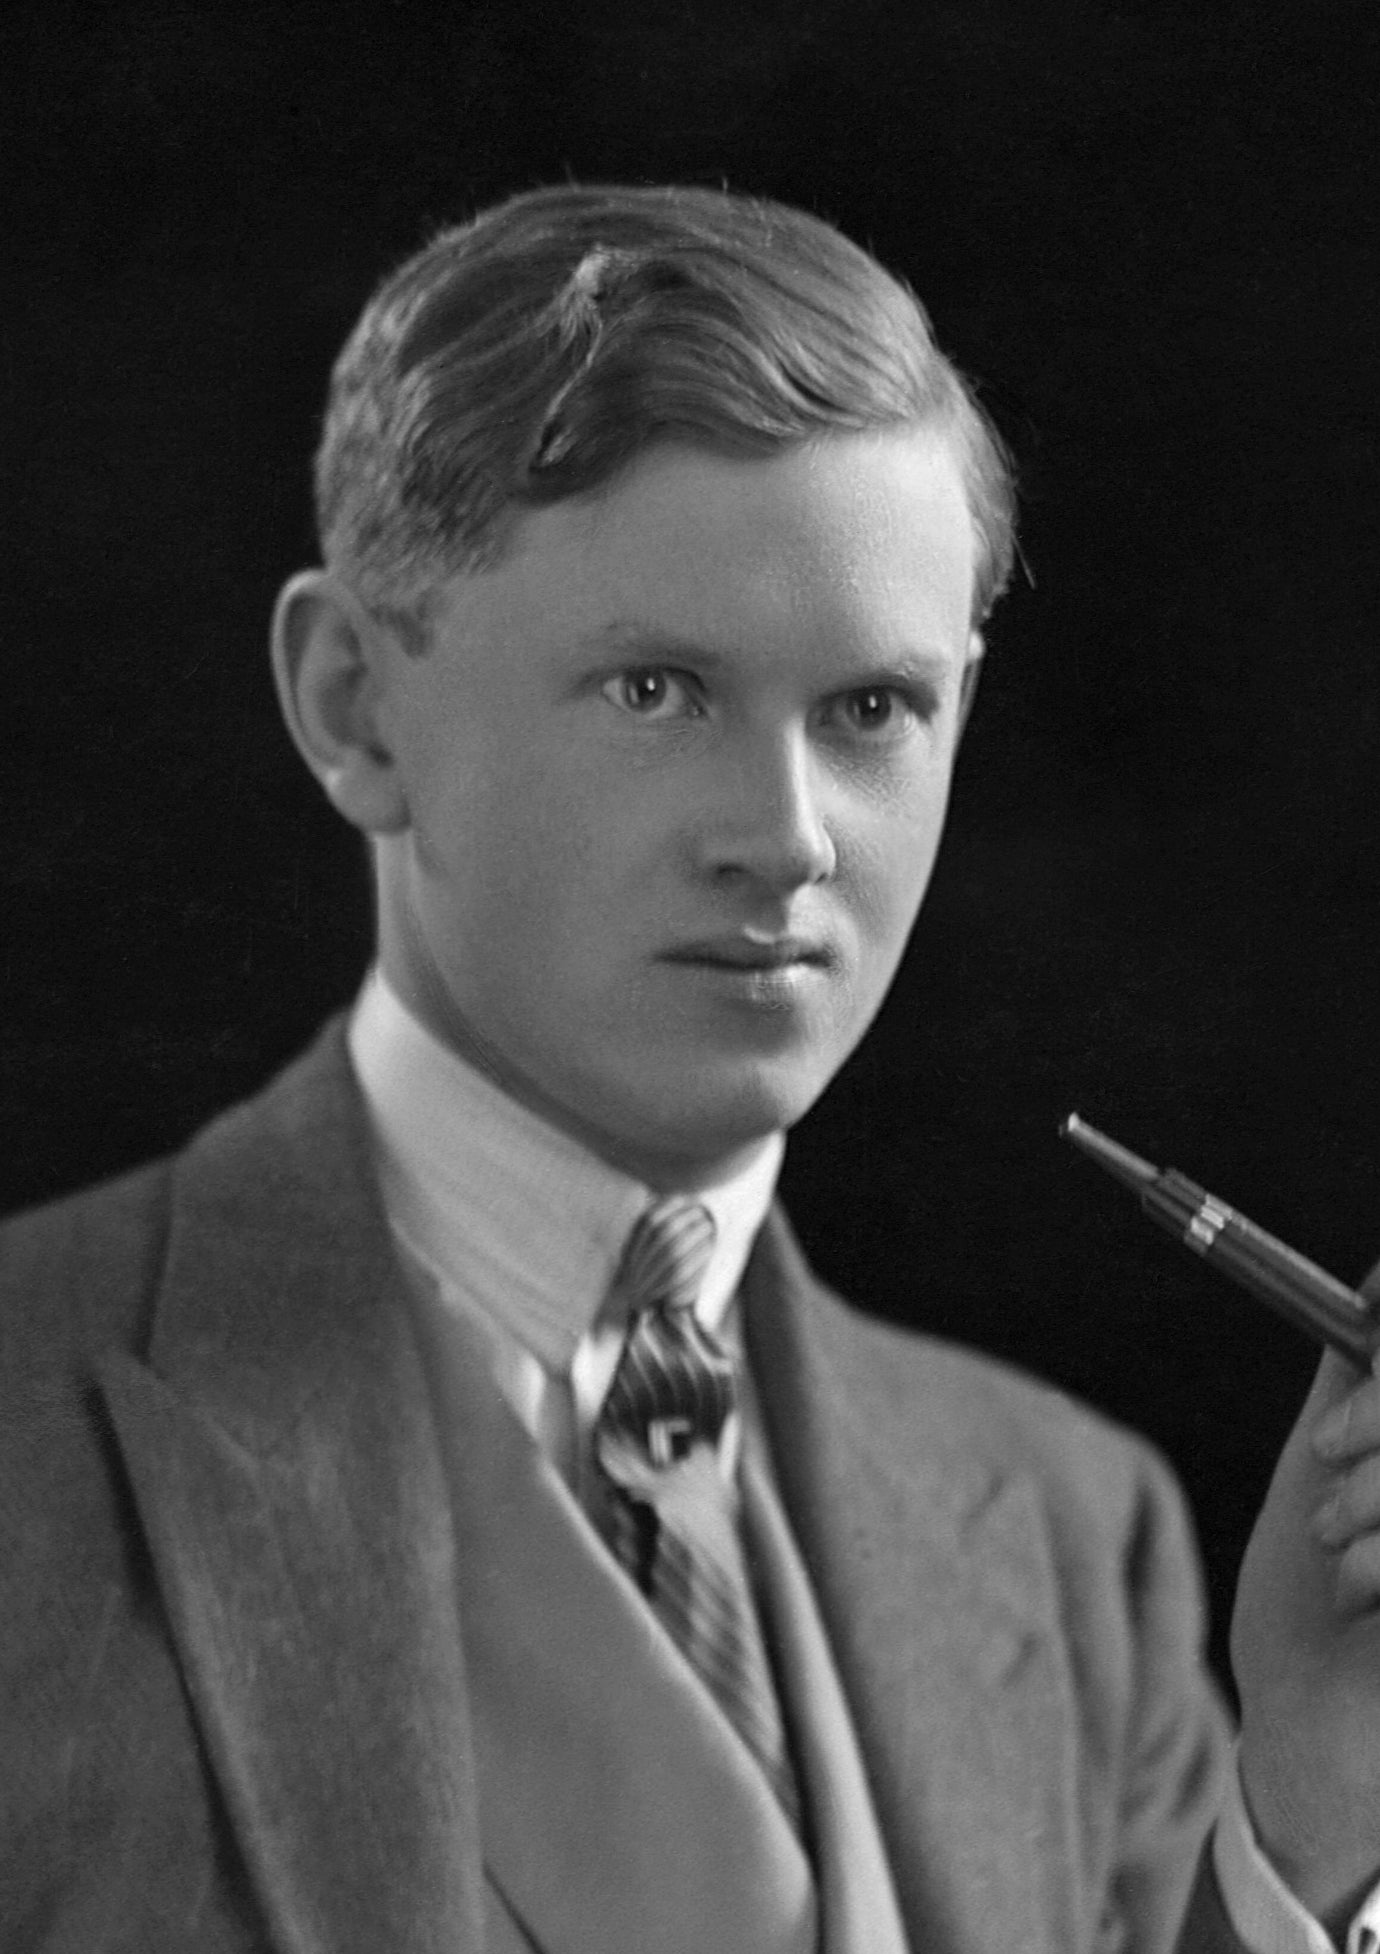 male novelist evelyn waugh is shown